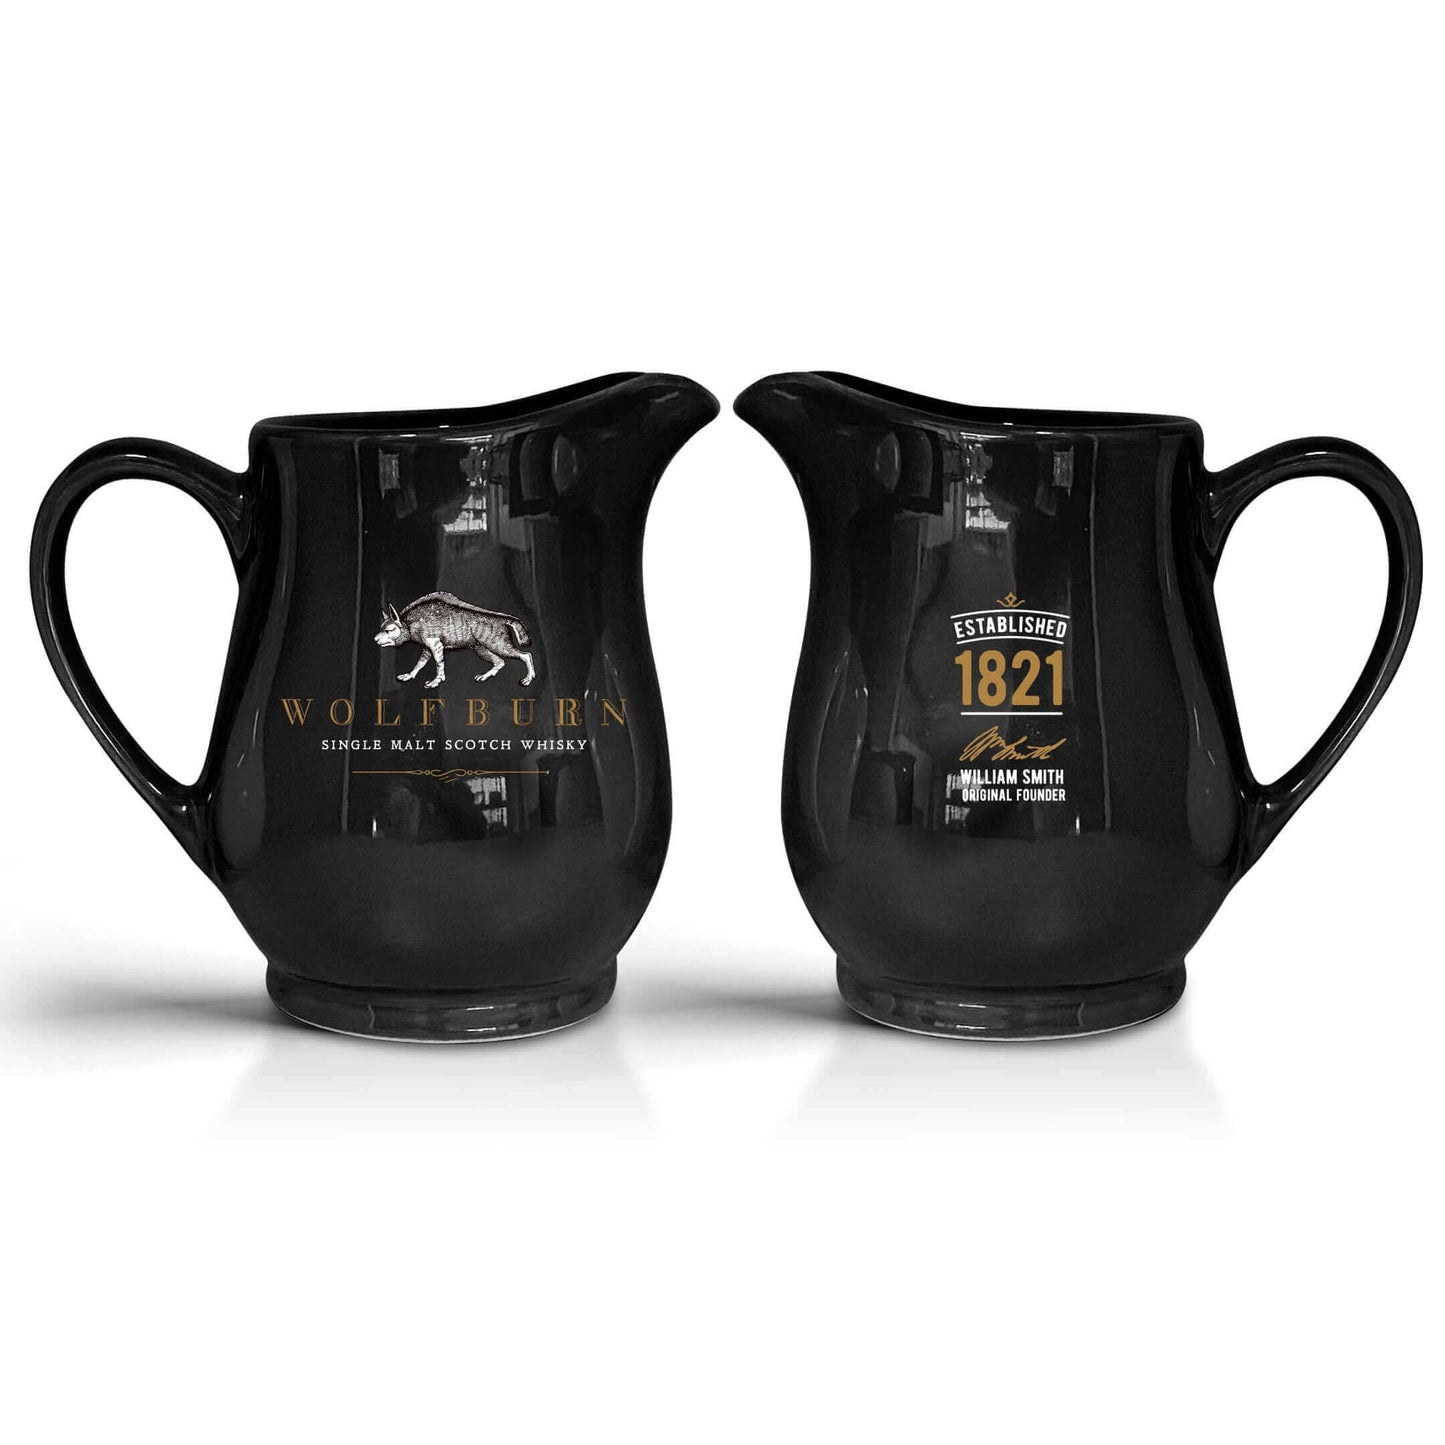 Wolfburn Water Jug - black These hand made 300ml Ceramic jugs are ideally suited for adding a splash of water to your whisky and will make a perfect gift or memory of Wolfburn.